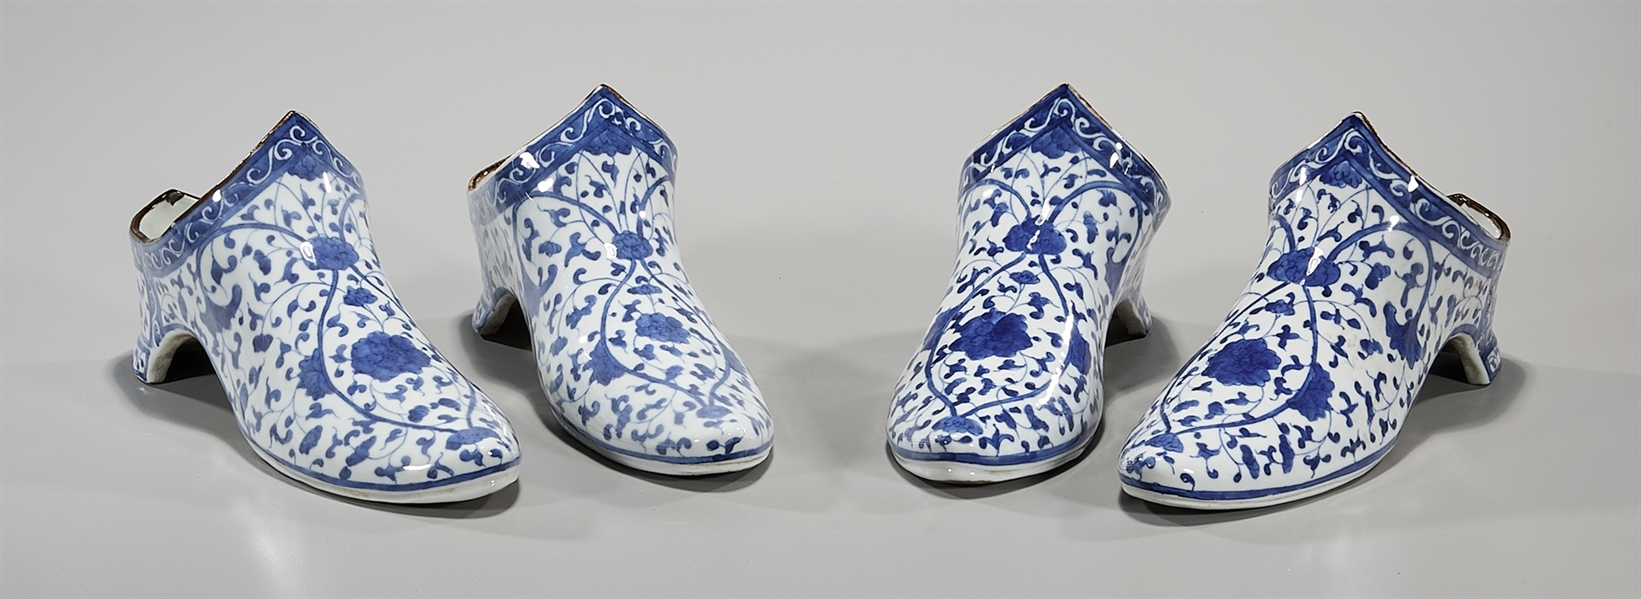 Two pairs of Chinese blue and white